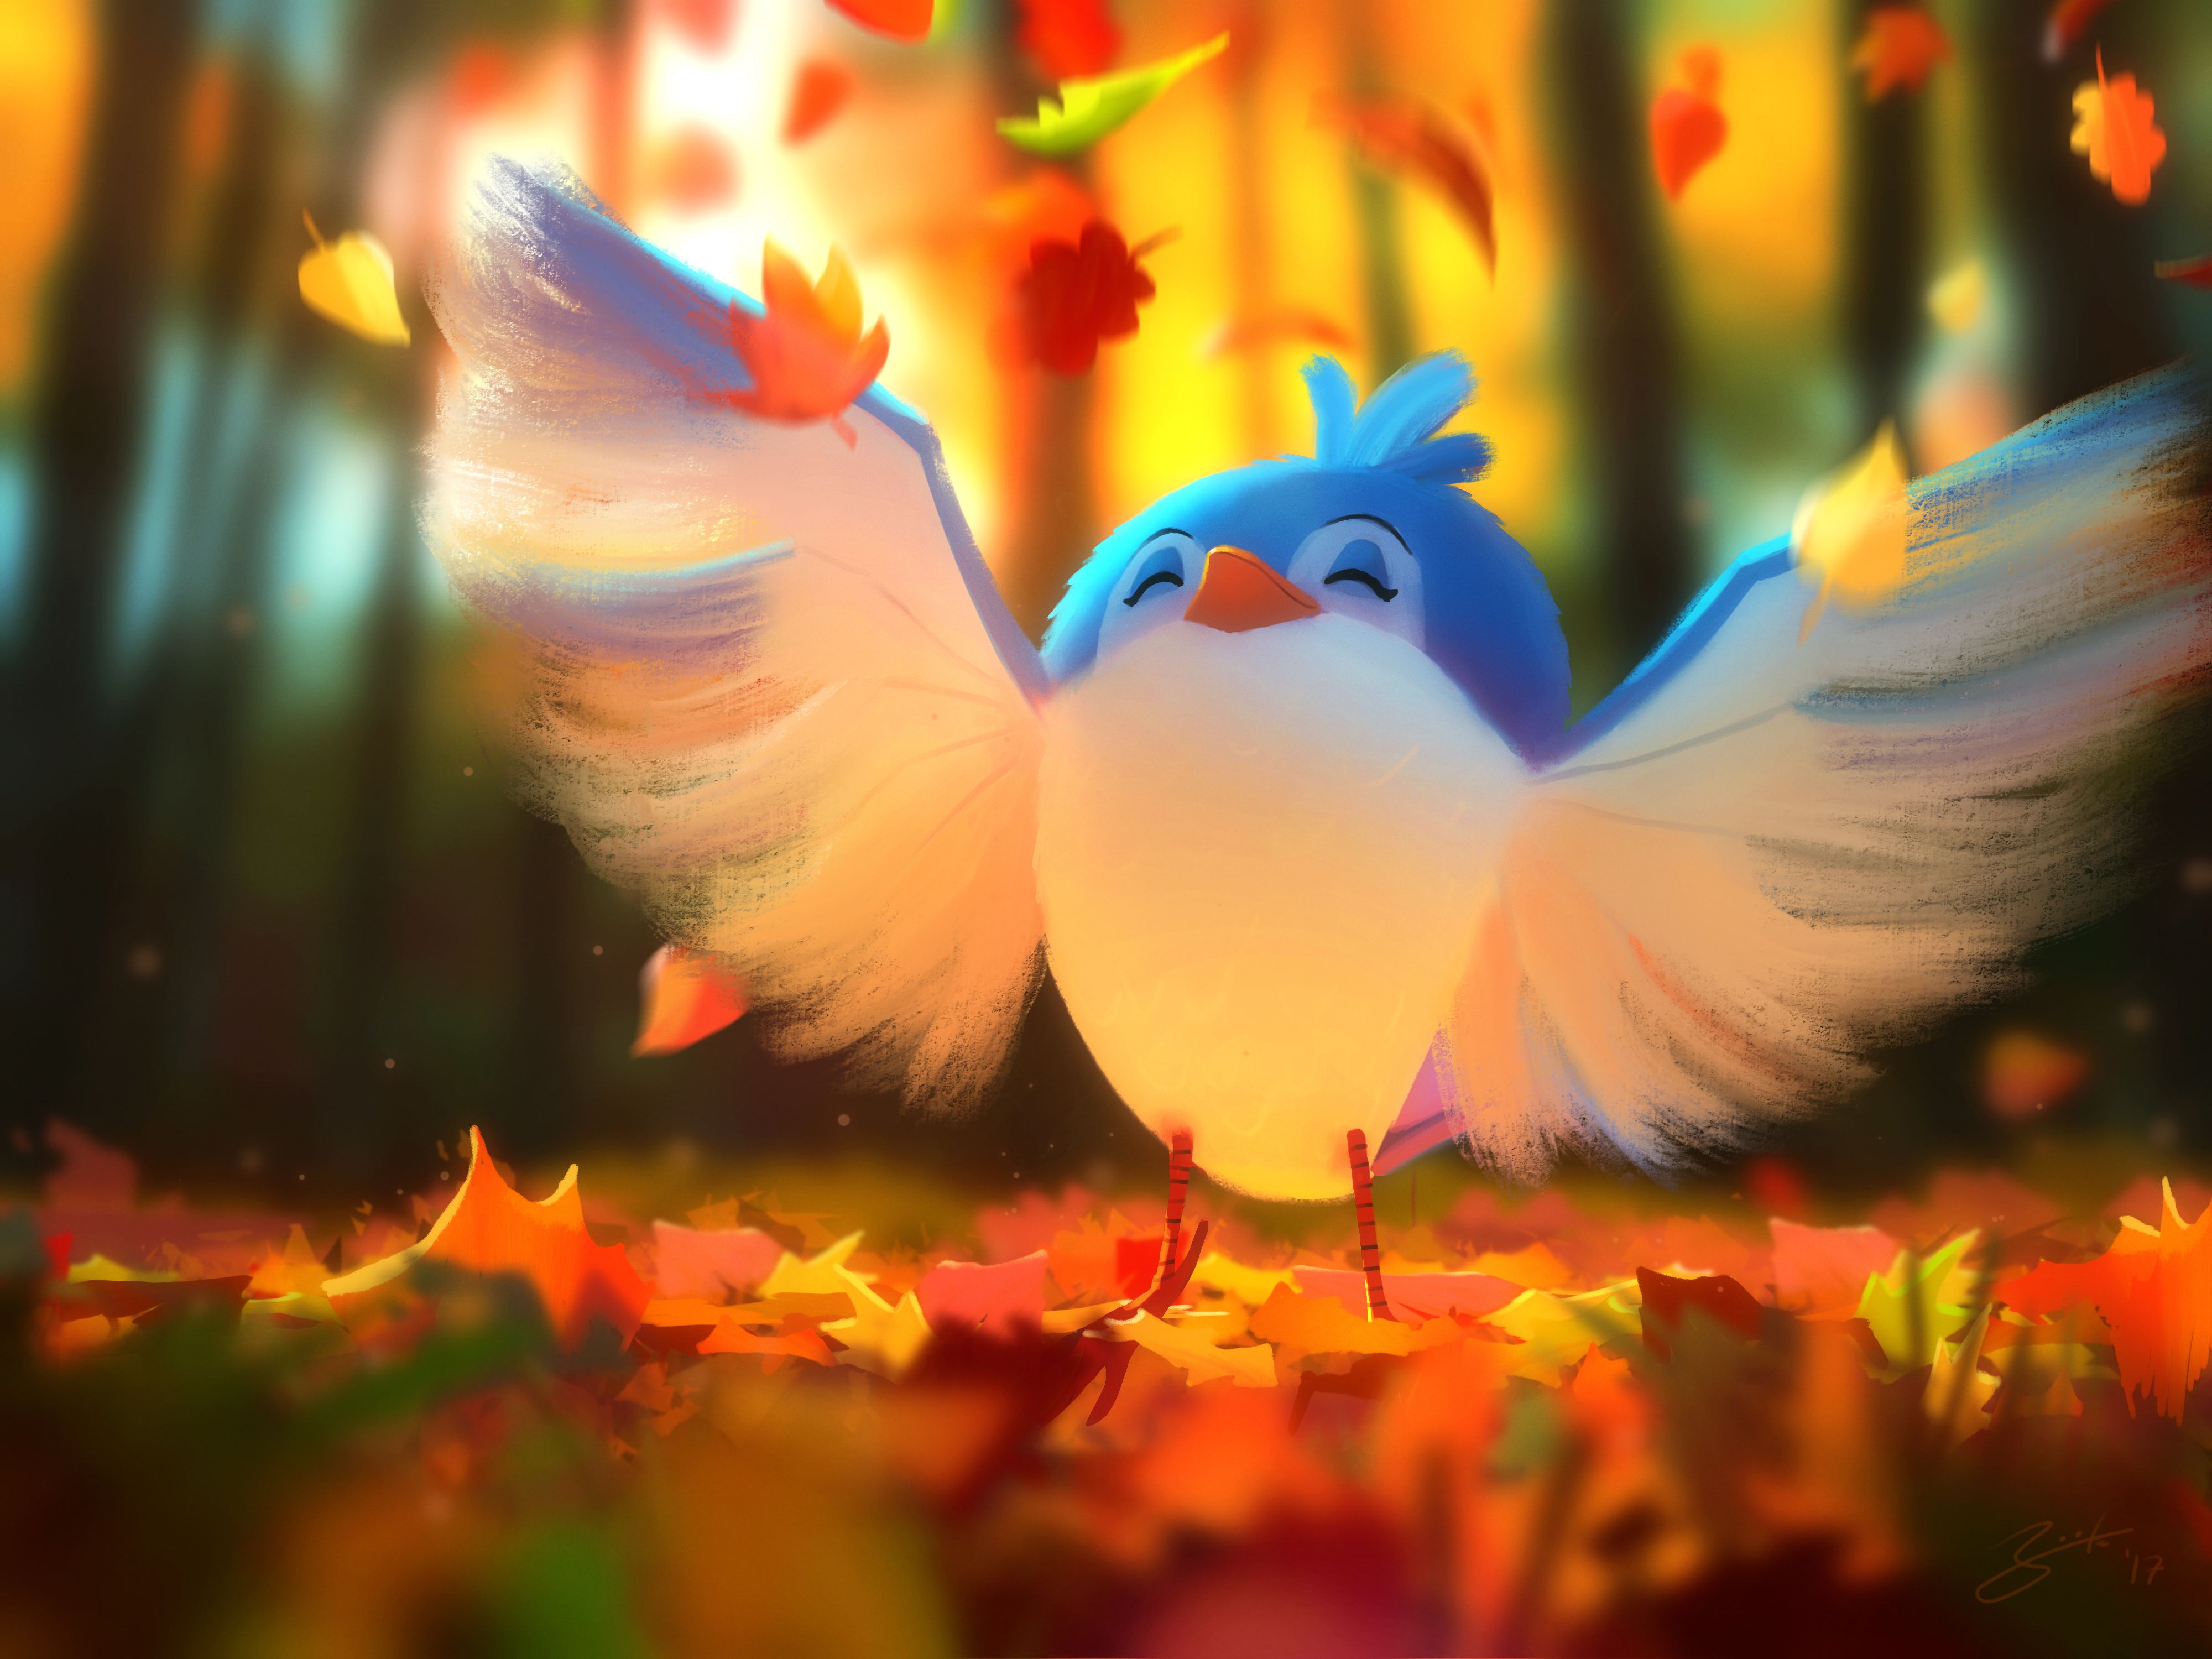 Wallpaper Cute bird, Digital paint, 4K, Creative Graphics,. Wallpaper for iPhone, Android, Mobile and Desktop